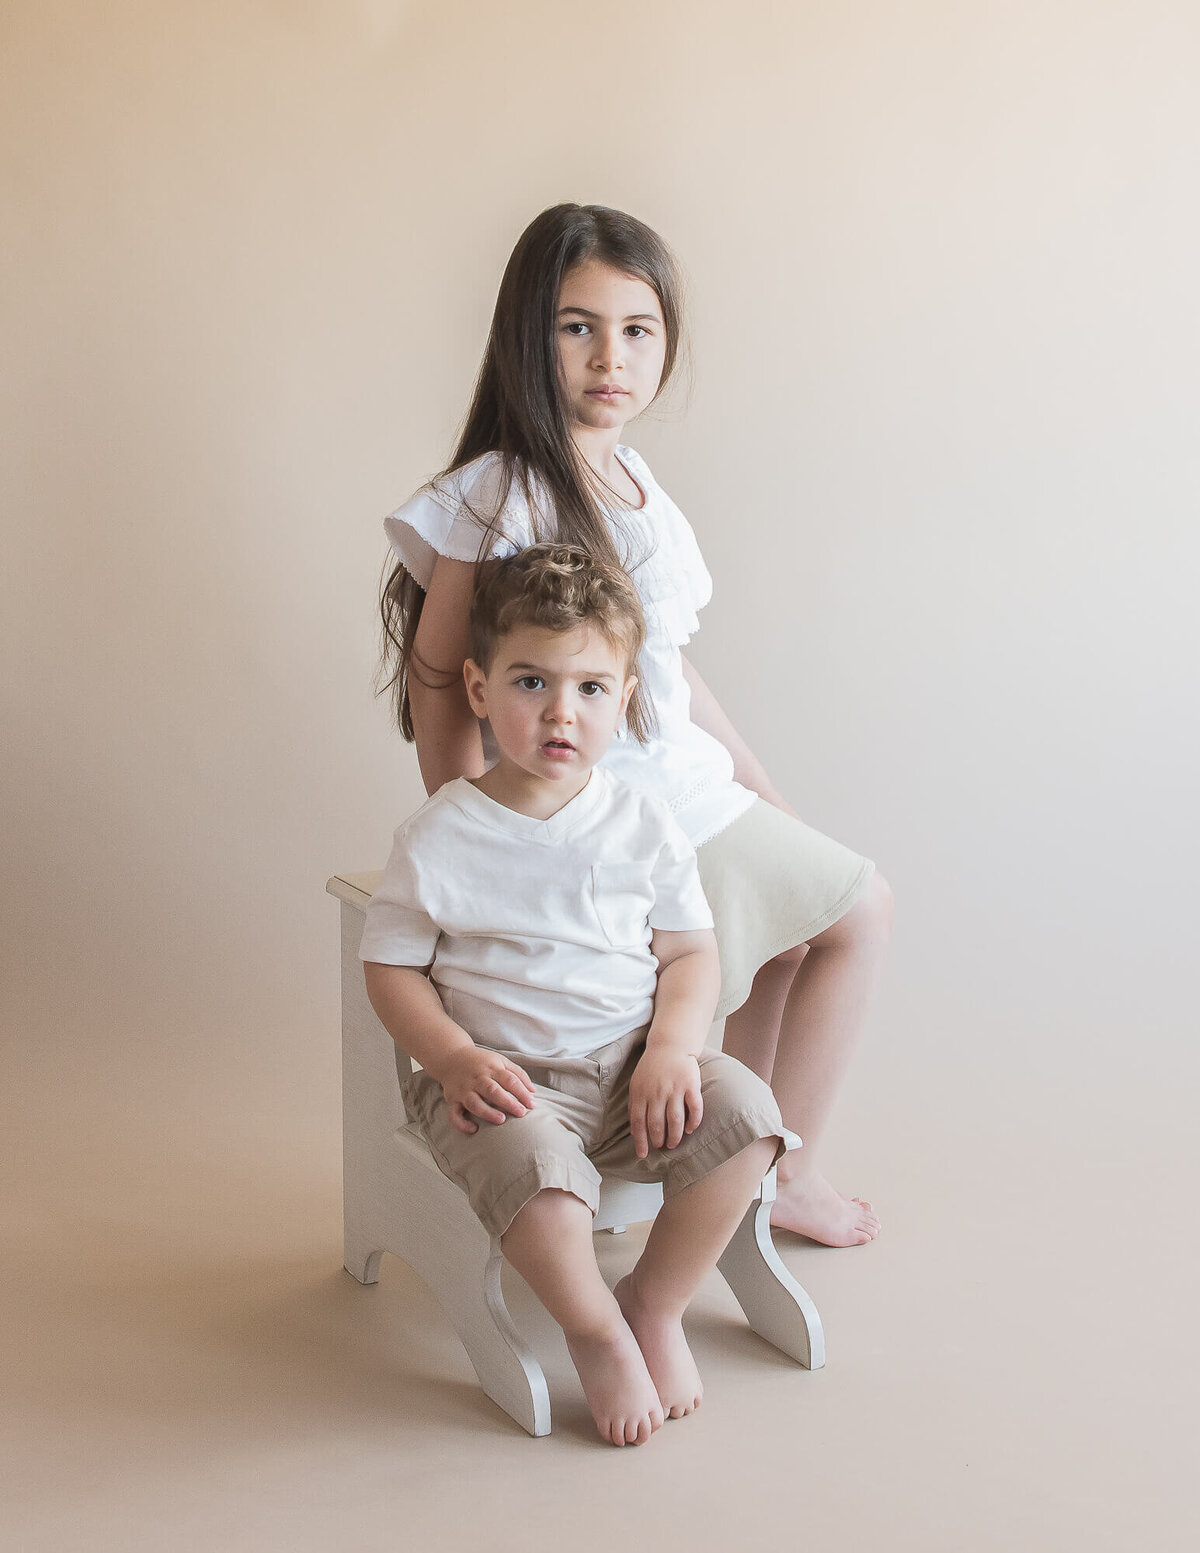 siblings wearing beige bottoms and white tops  with serious faces  with a tan background